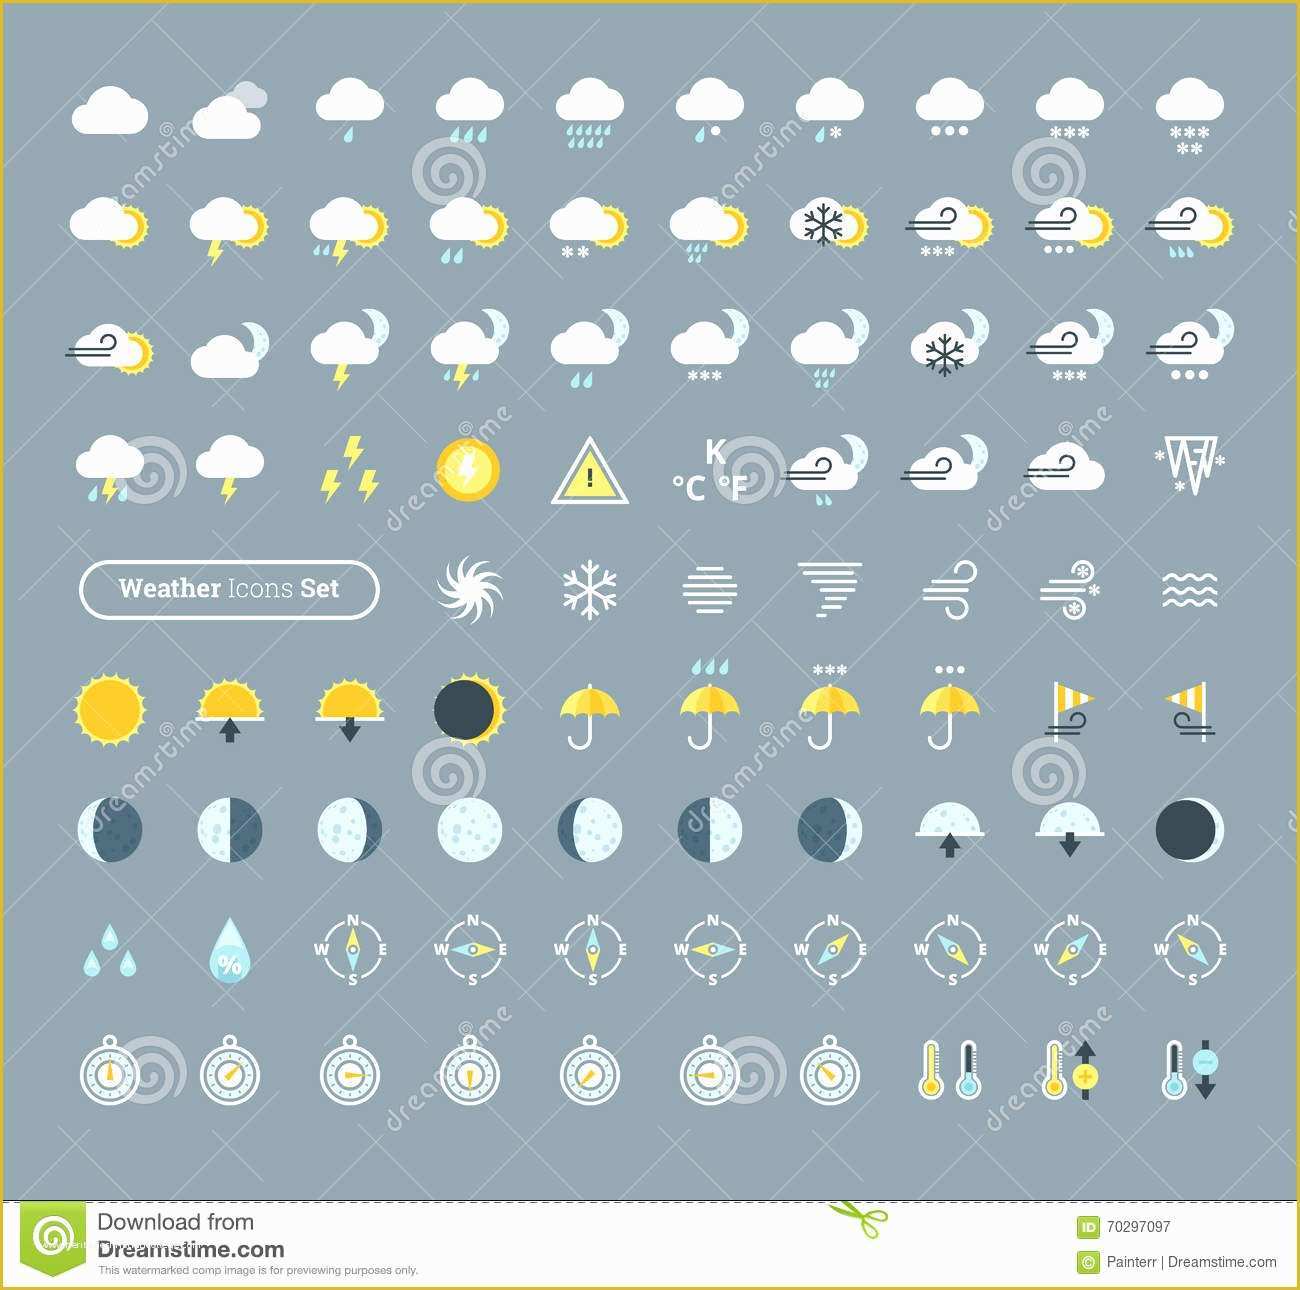 Free Weather Website Templates Of Weather Wid S Template Icons for Puting Web Royalty